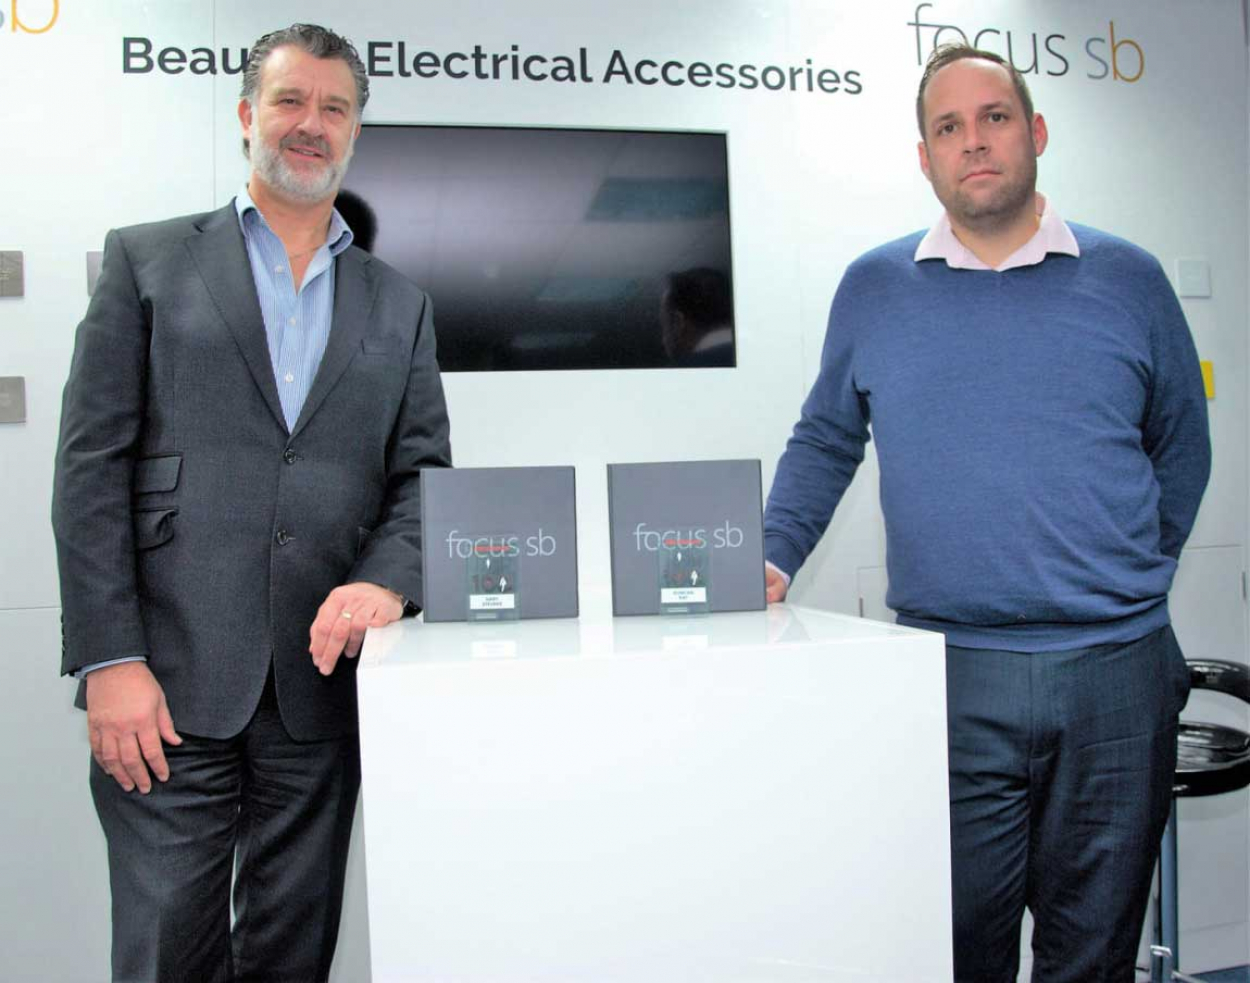 Image caption (from left to right): Gary Stevens, managing director, with Duncan Ray, supply chain and NPI manager, pictured with their Top 100 trophies in Focus SB’s showroom in St Leonards on Sea, East Sussex.